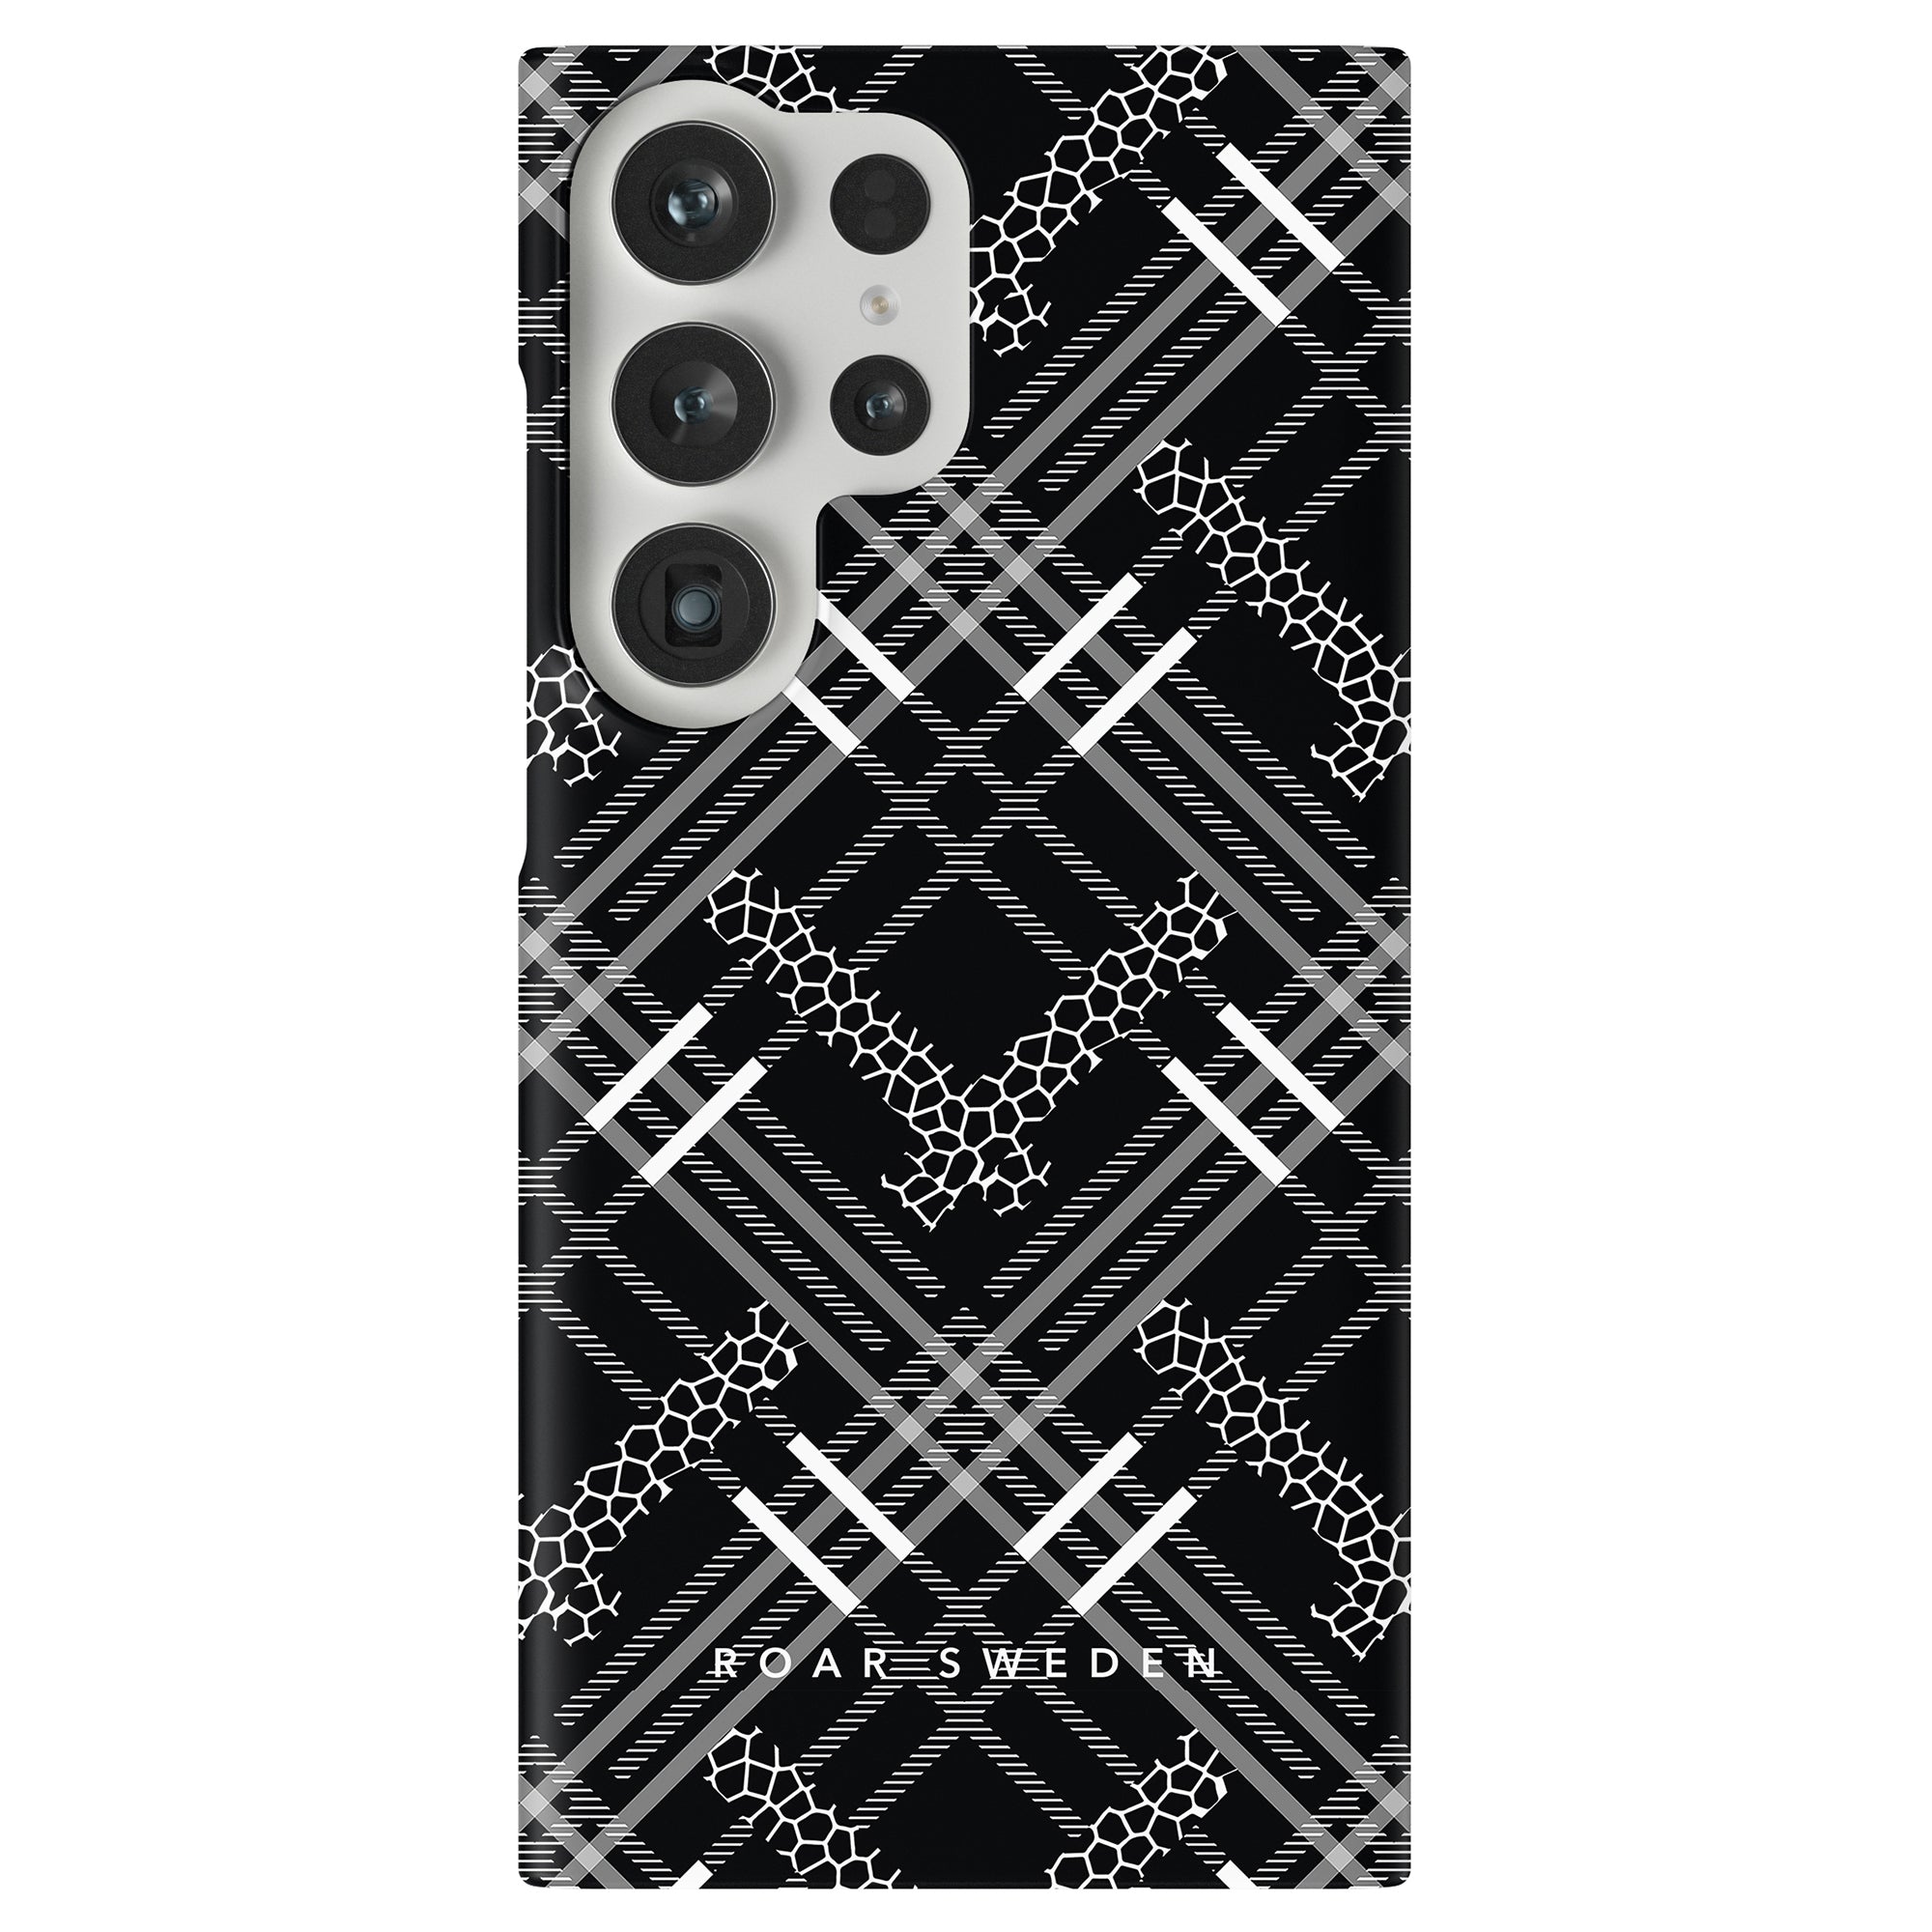 A Tartan Giraffe - Slim case phone case with a plaid pattern made from durable material.